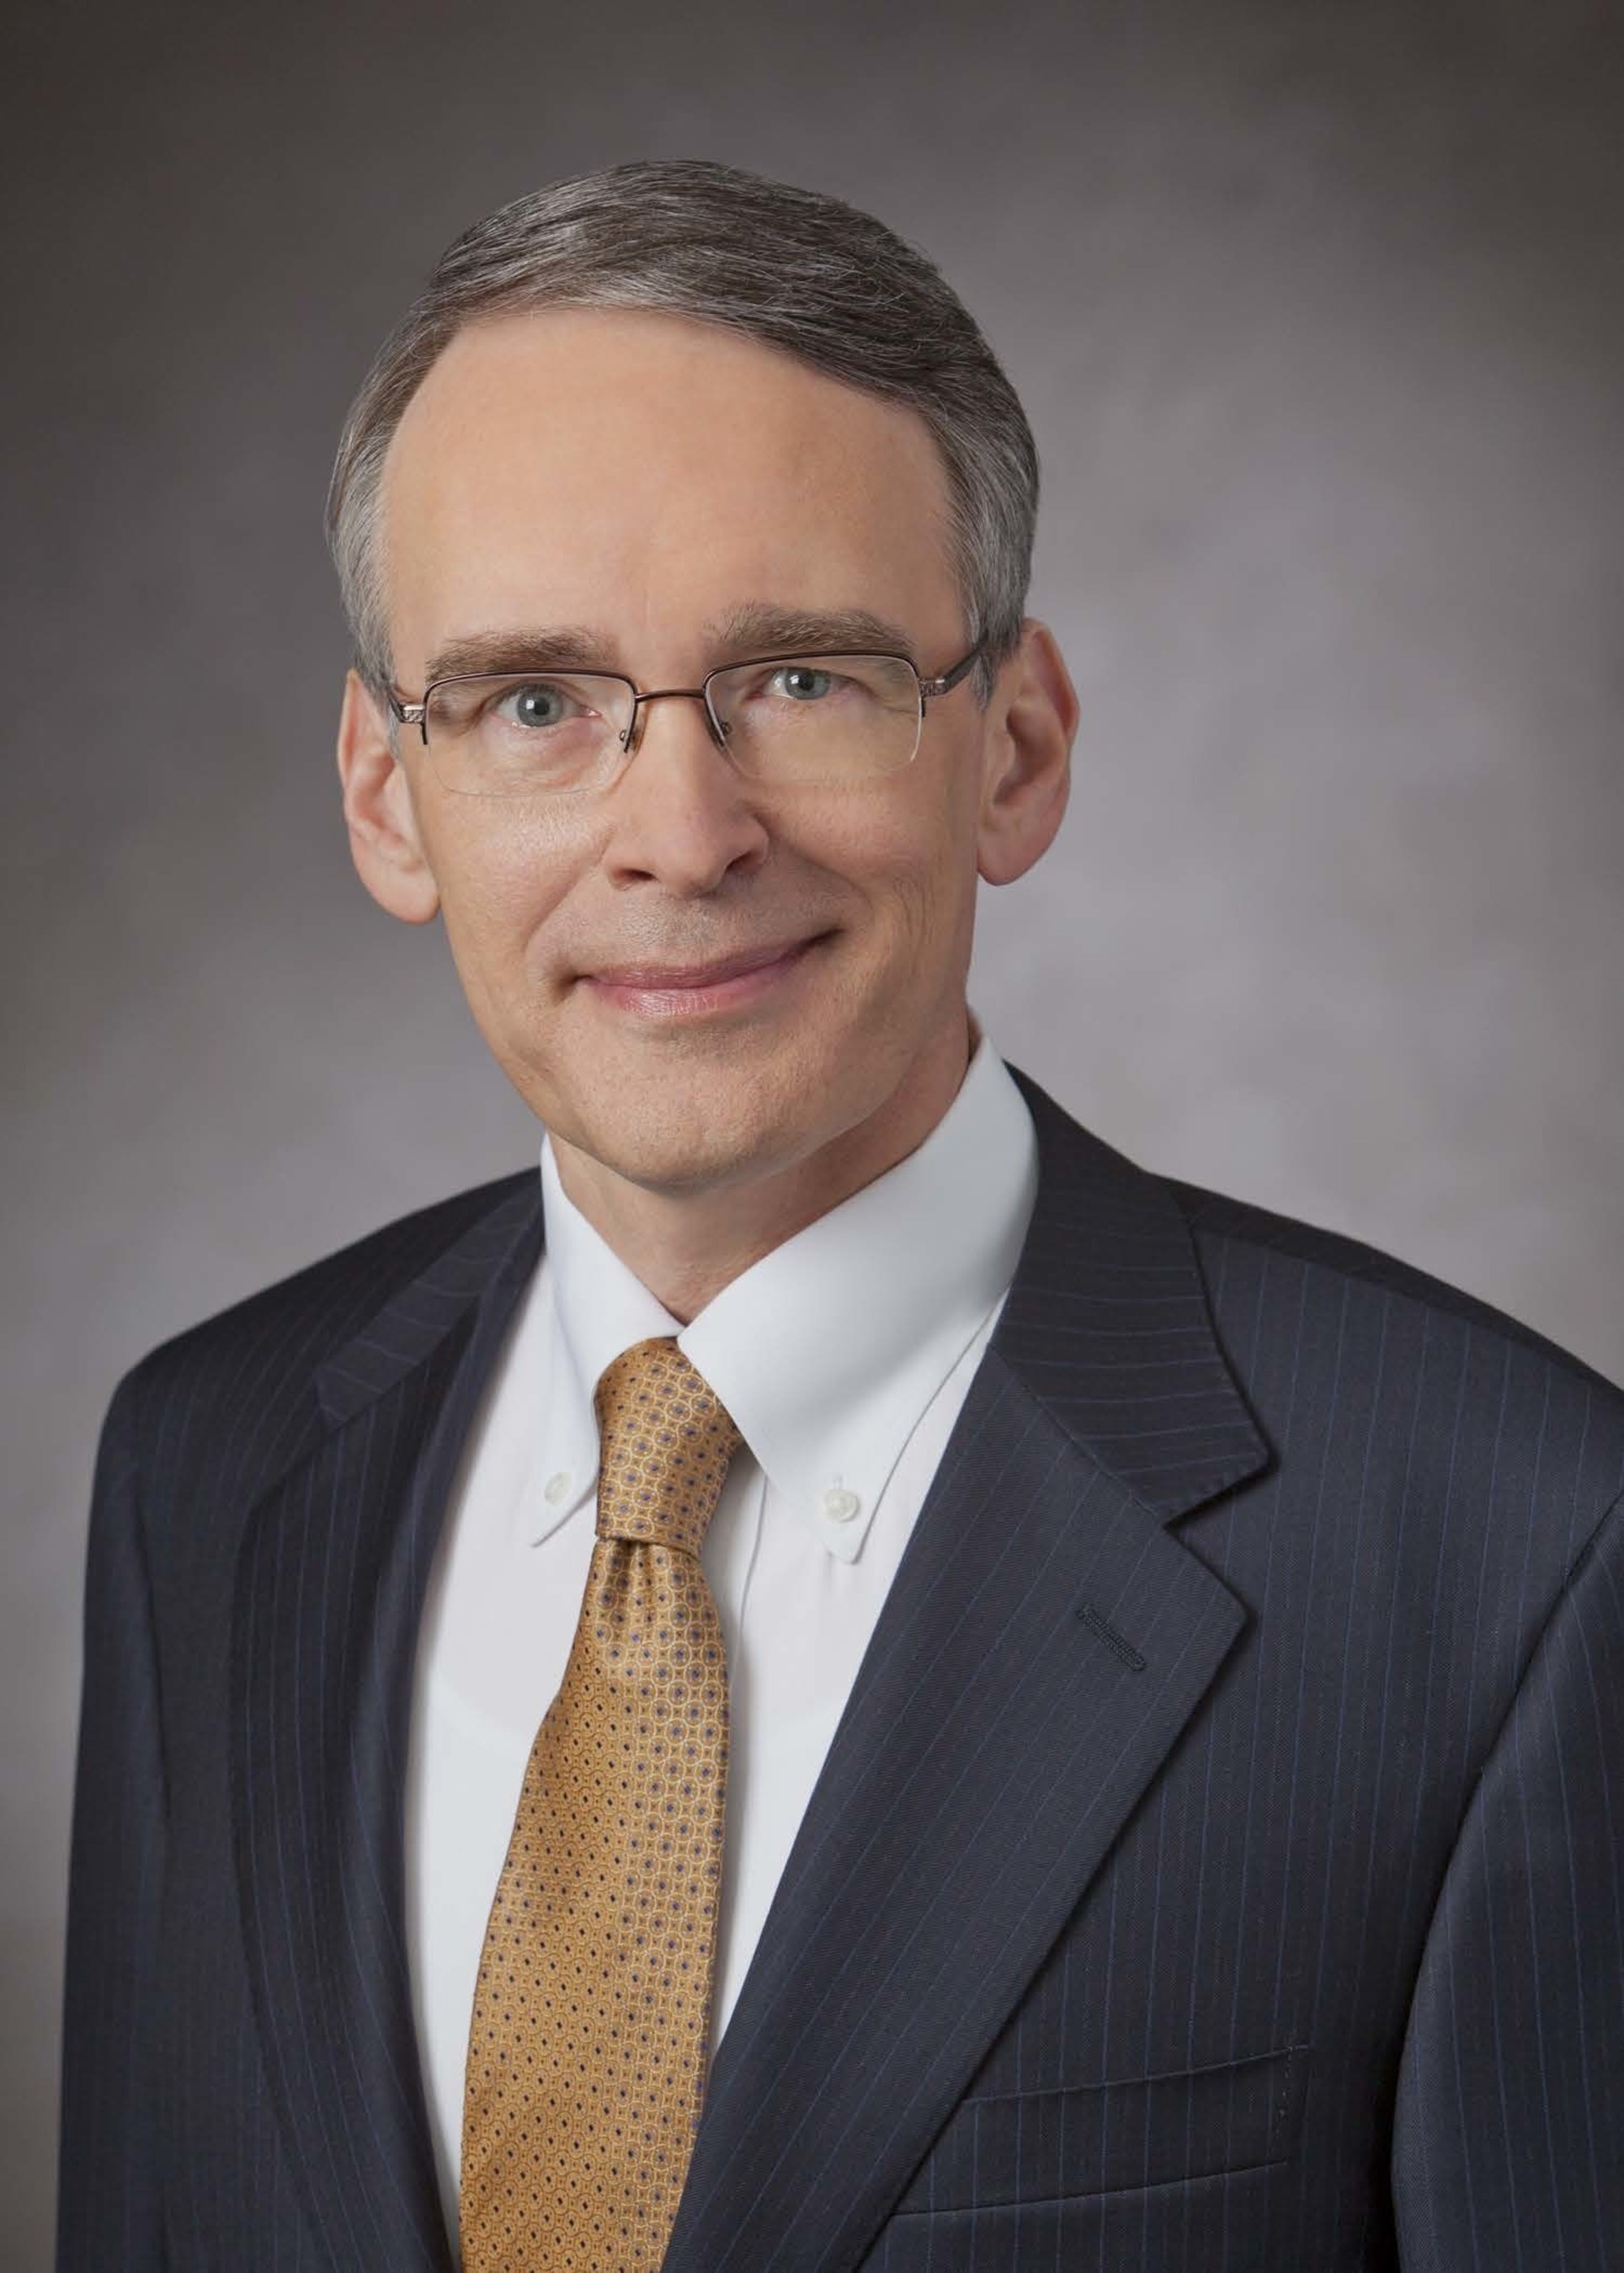 Henry R. Keizer, formerly deputy chairman and chief operating officer of KPMG, was elected to the Hertz Global Holdings, Inc. Board of Directors.